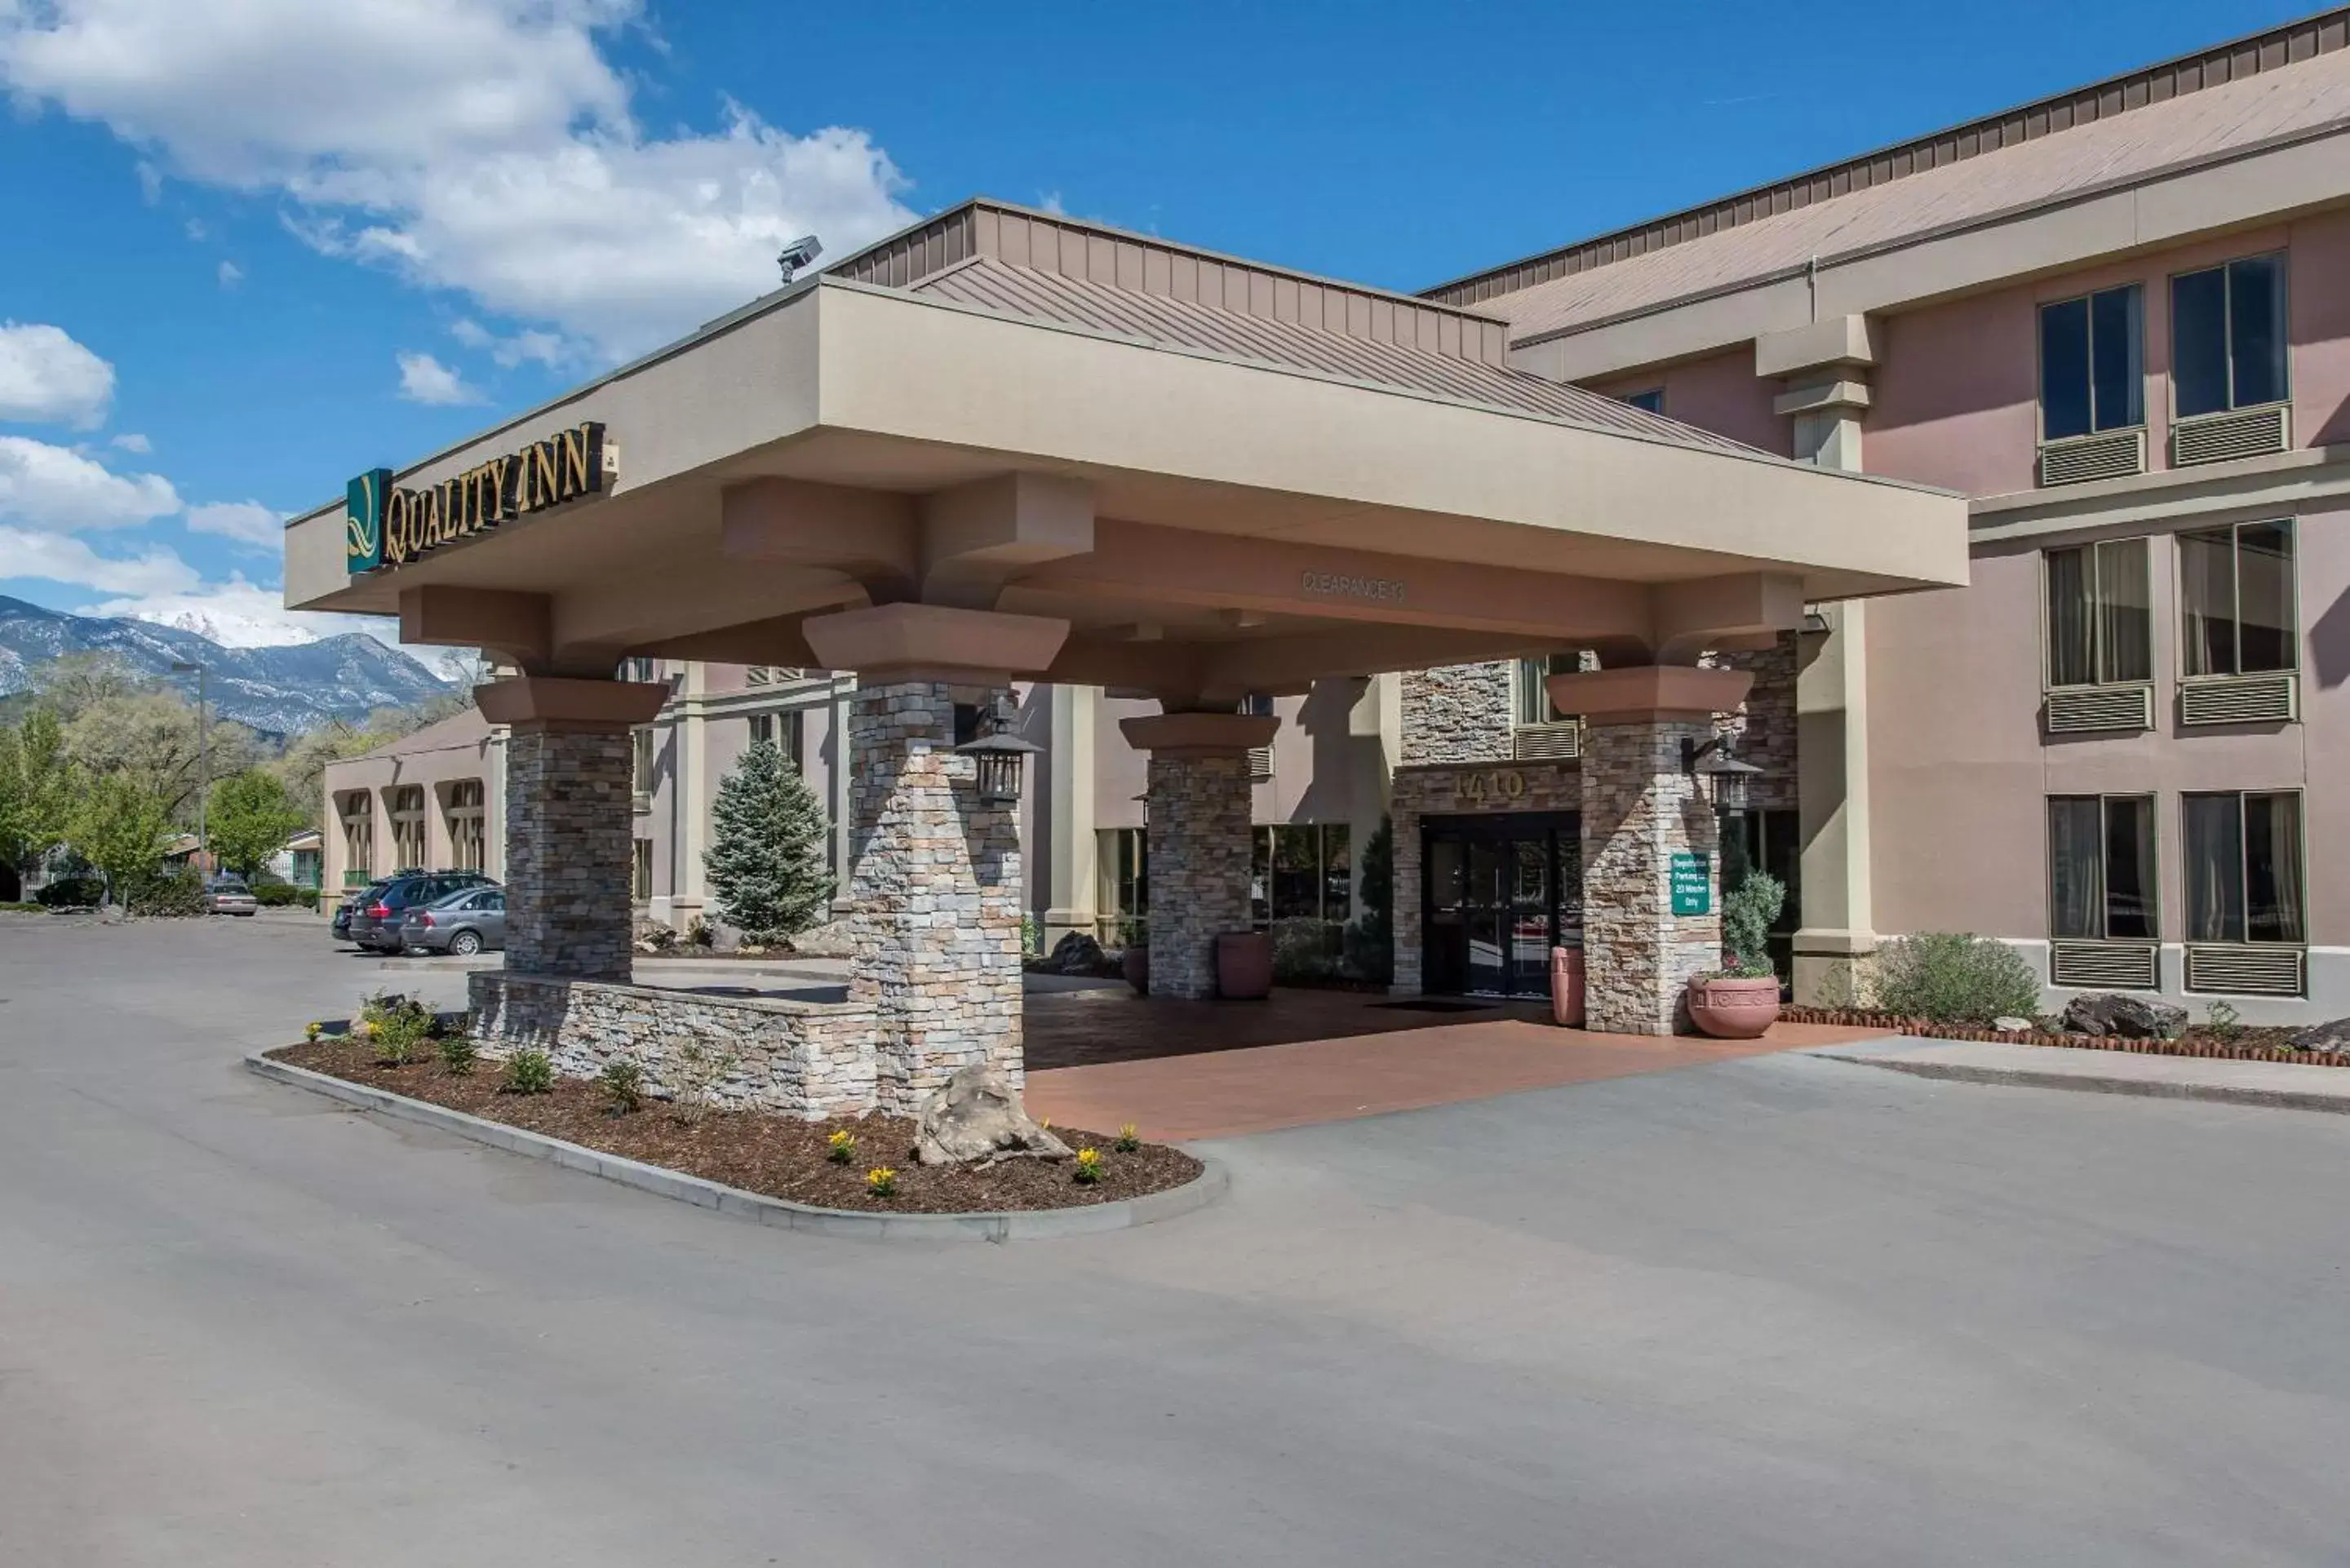 Property building in Quality Inn South Colorado Springs